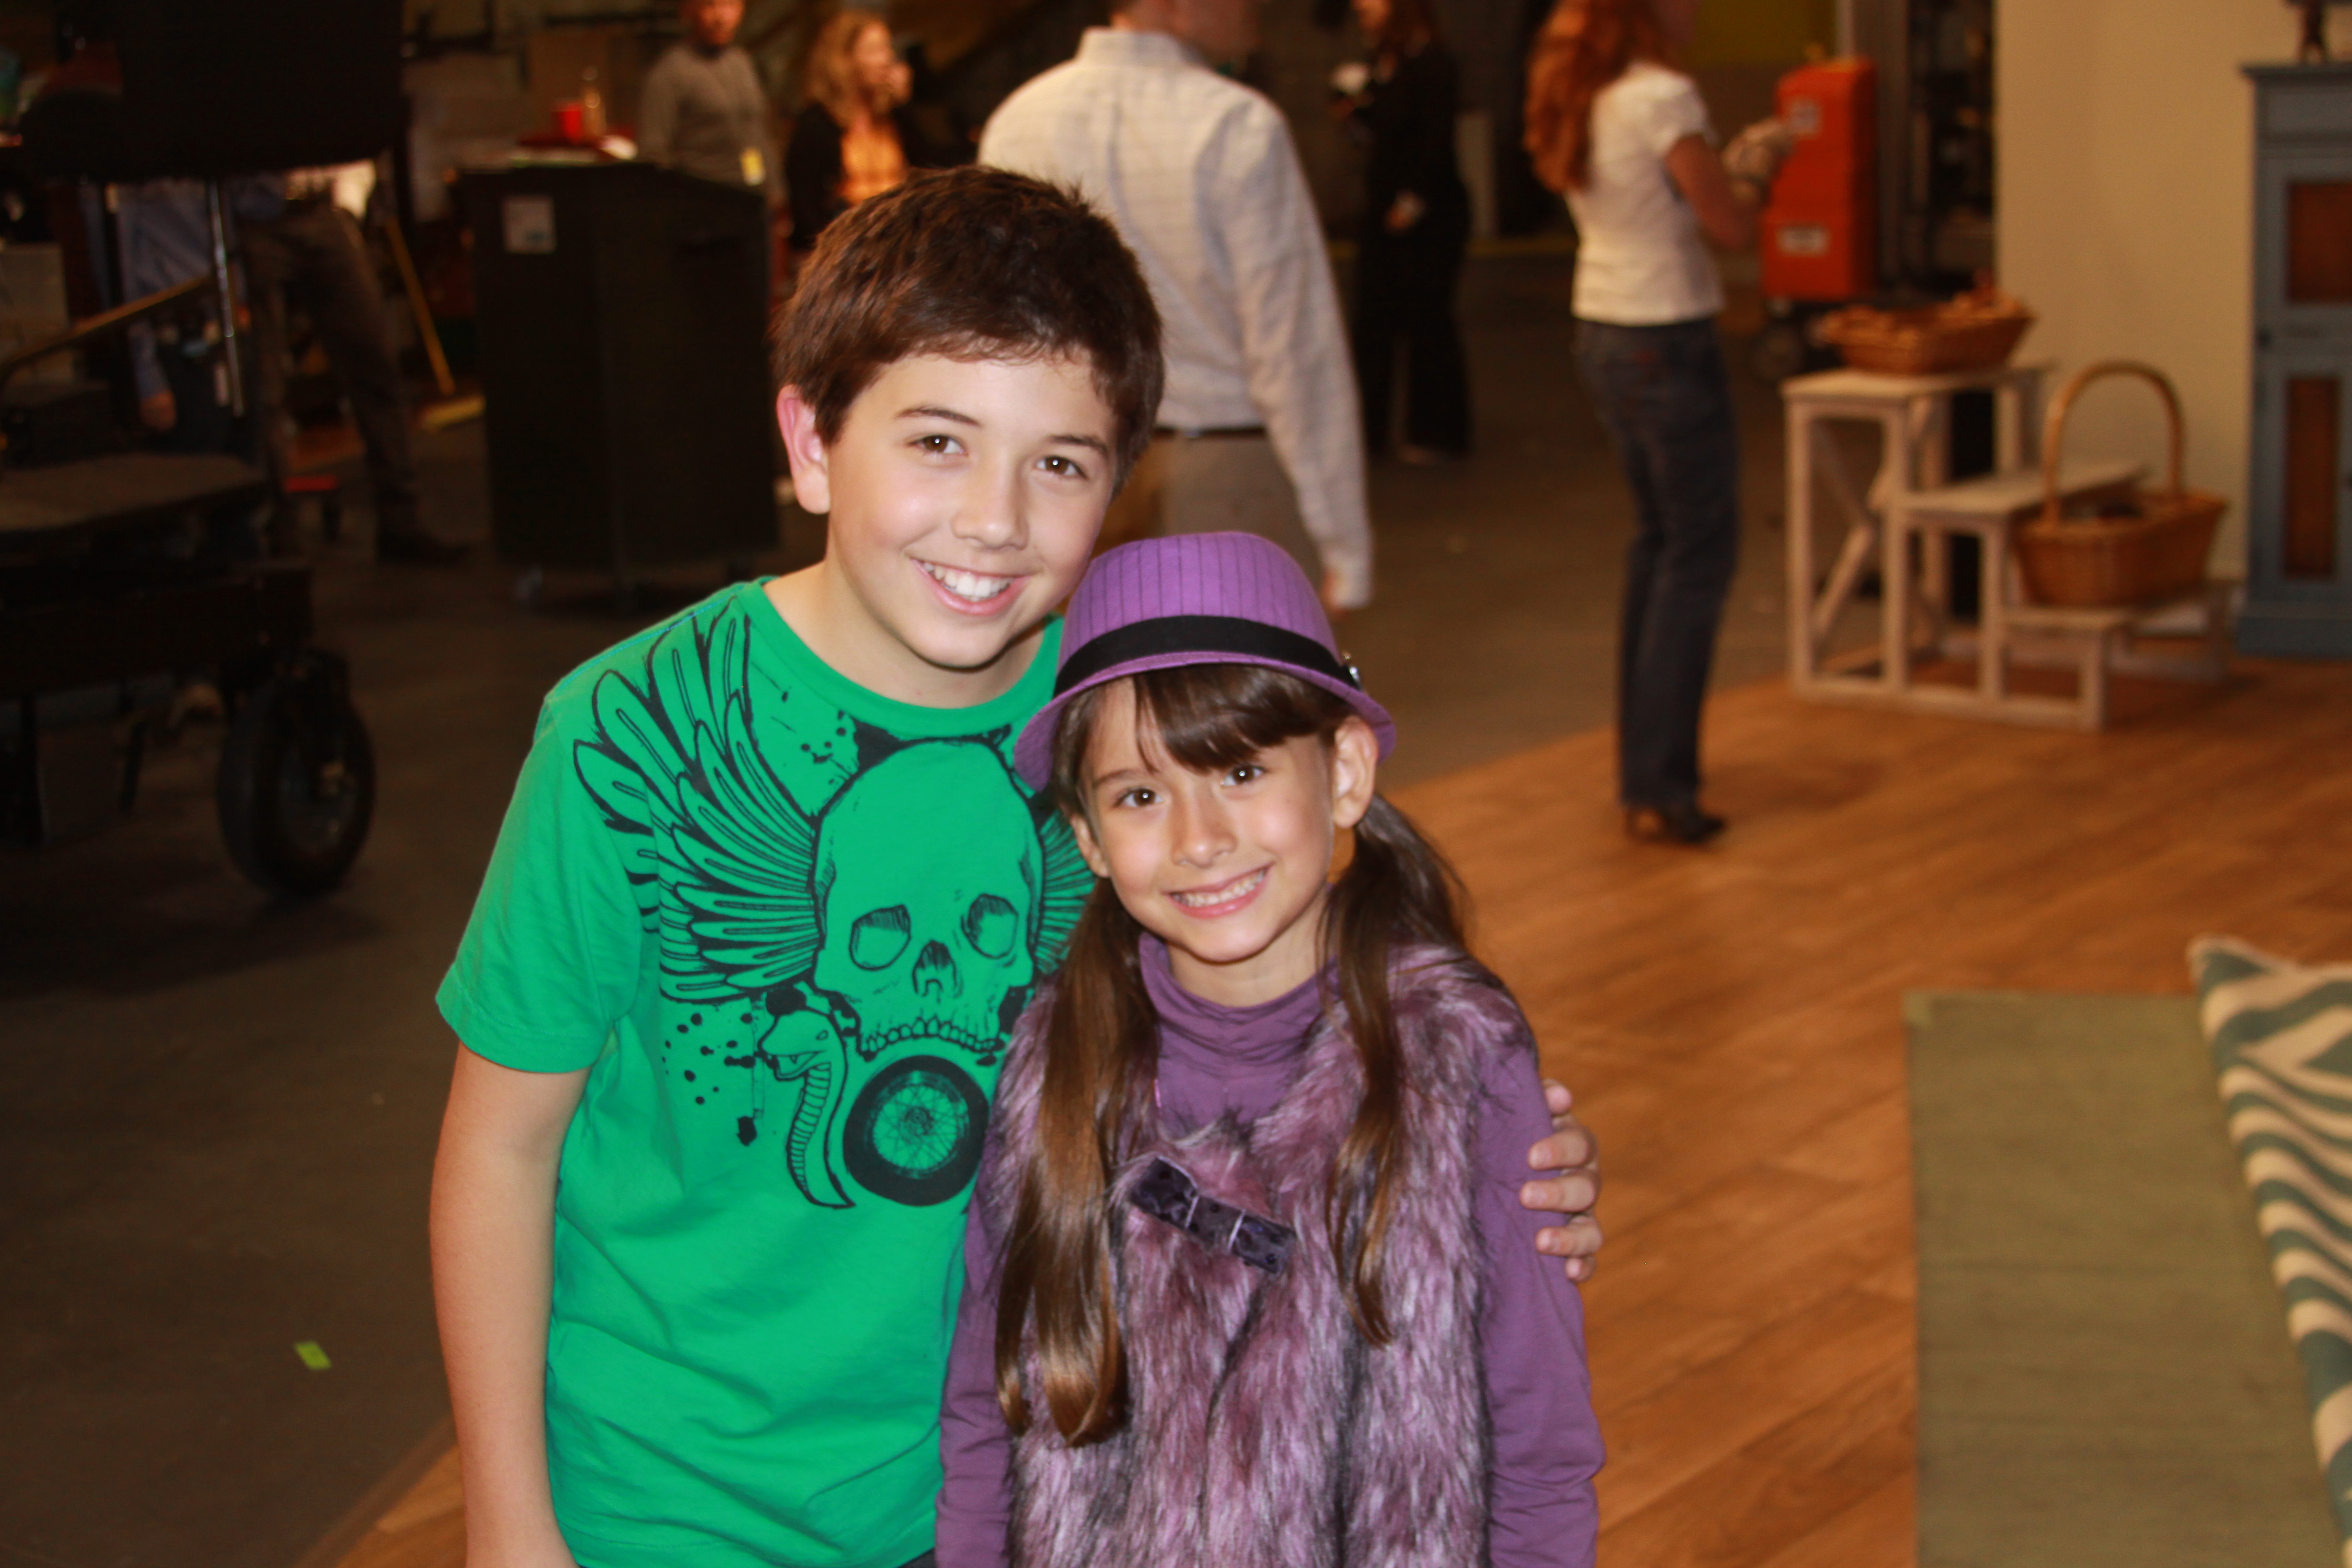 Bradley Steven Perry and Michelle Moores